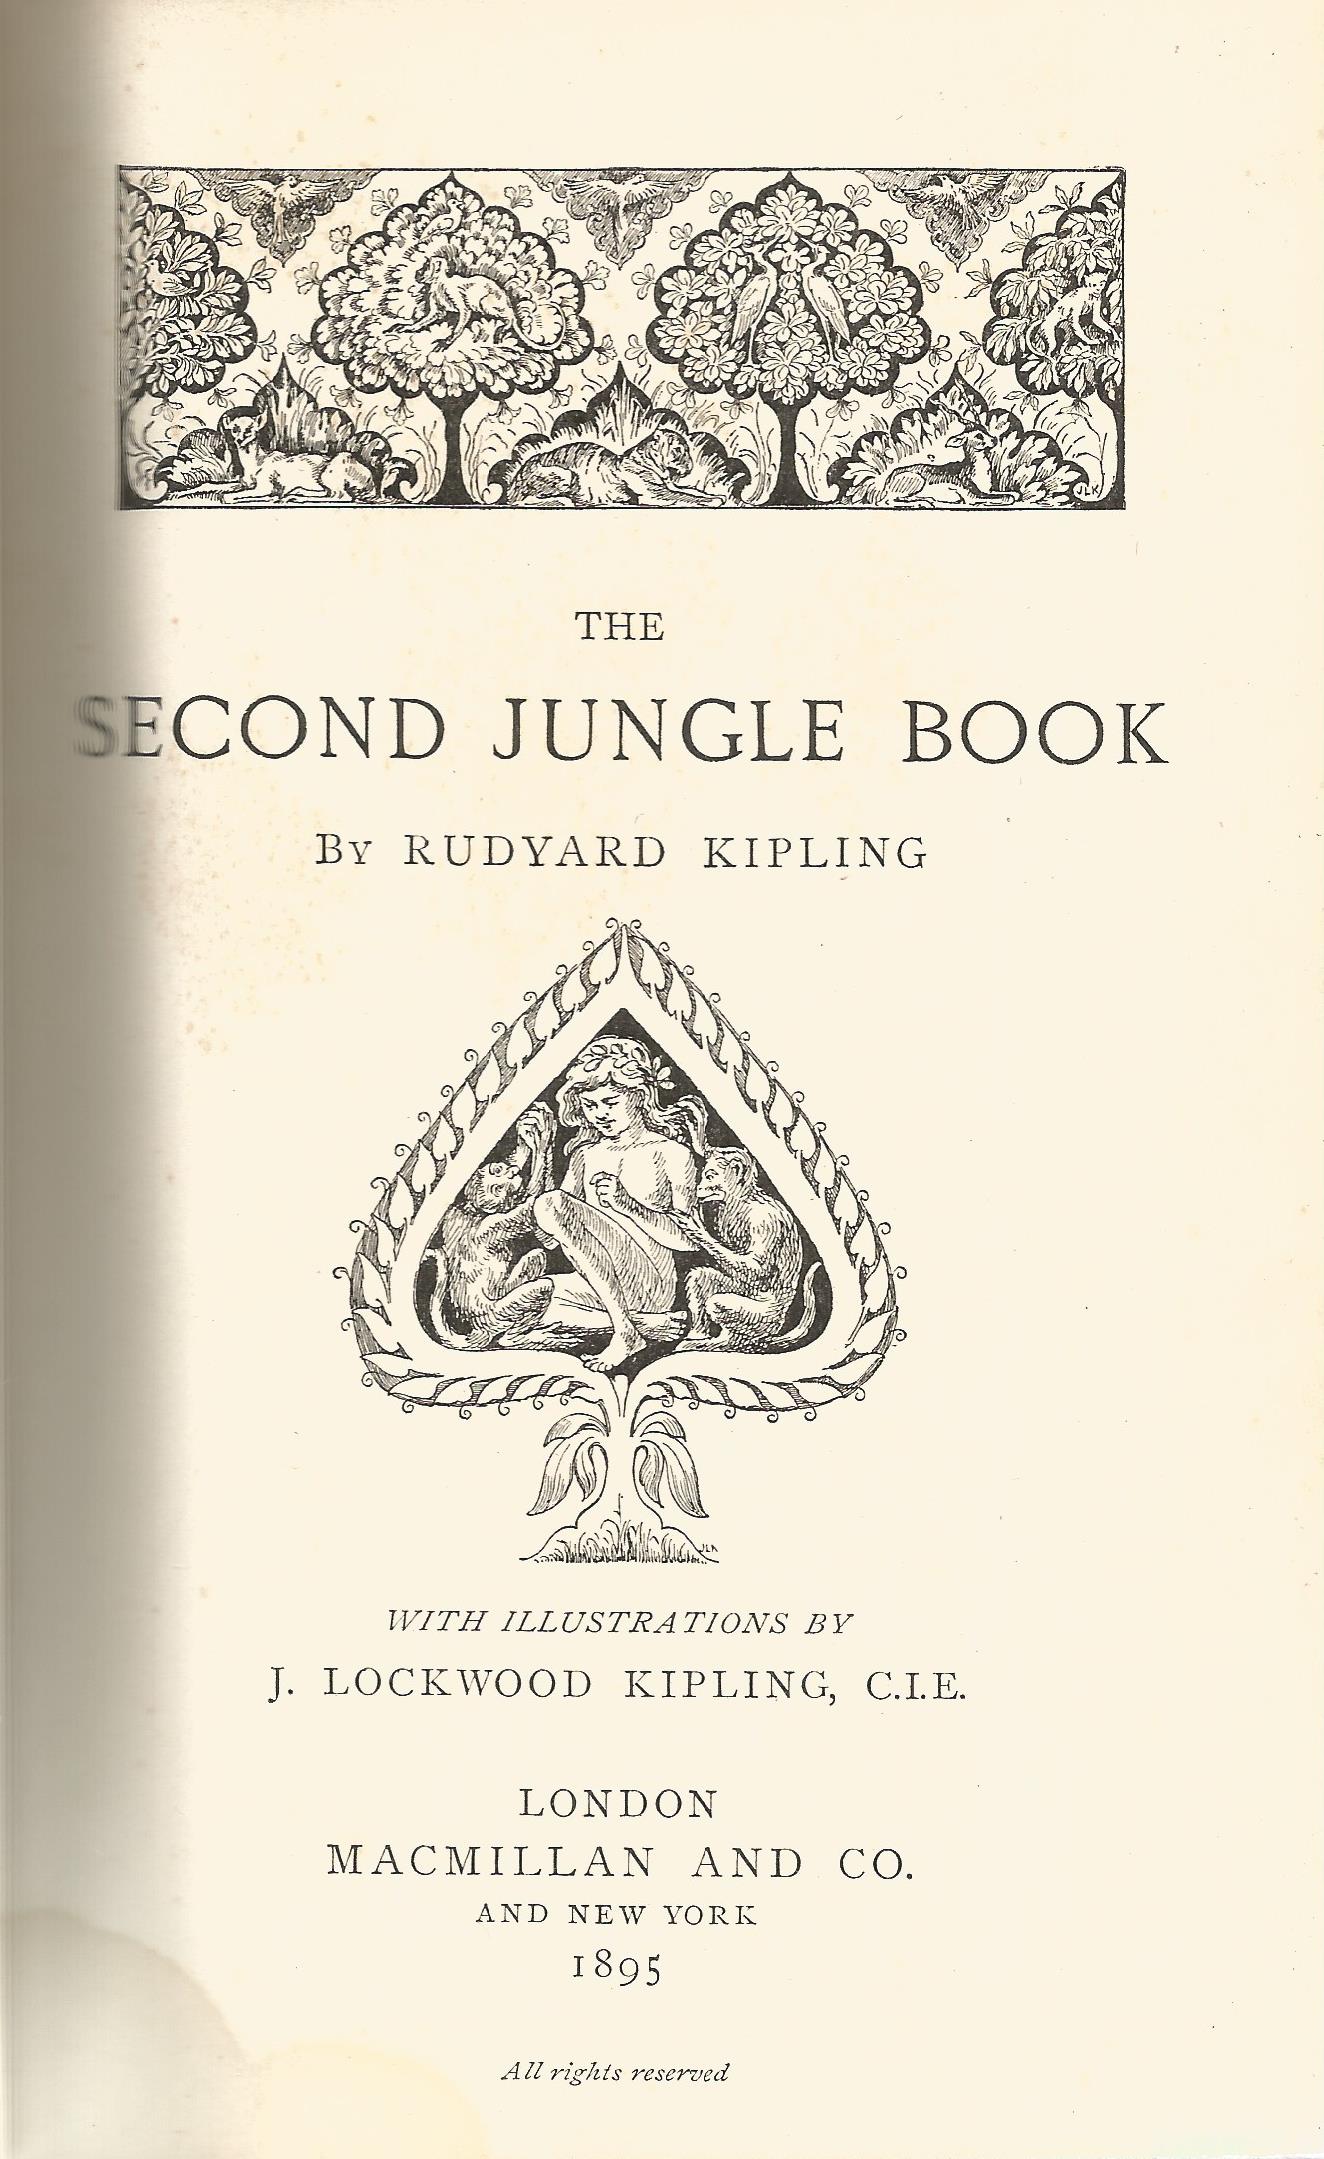 The Second Jungle Book by Rudyard Kipling 1895 First UK Edition Hardback Book published by Macmillan - Image 2 of 2